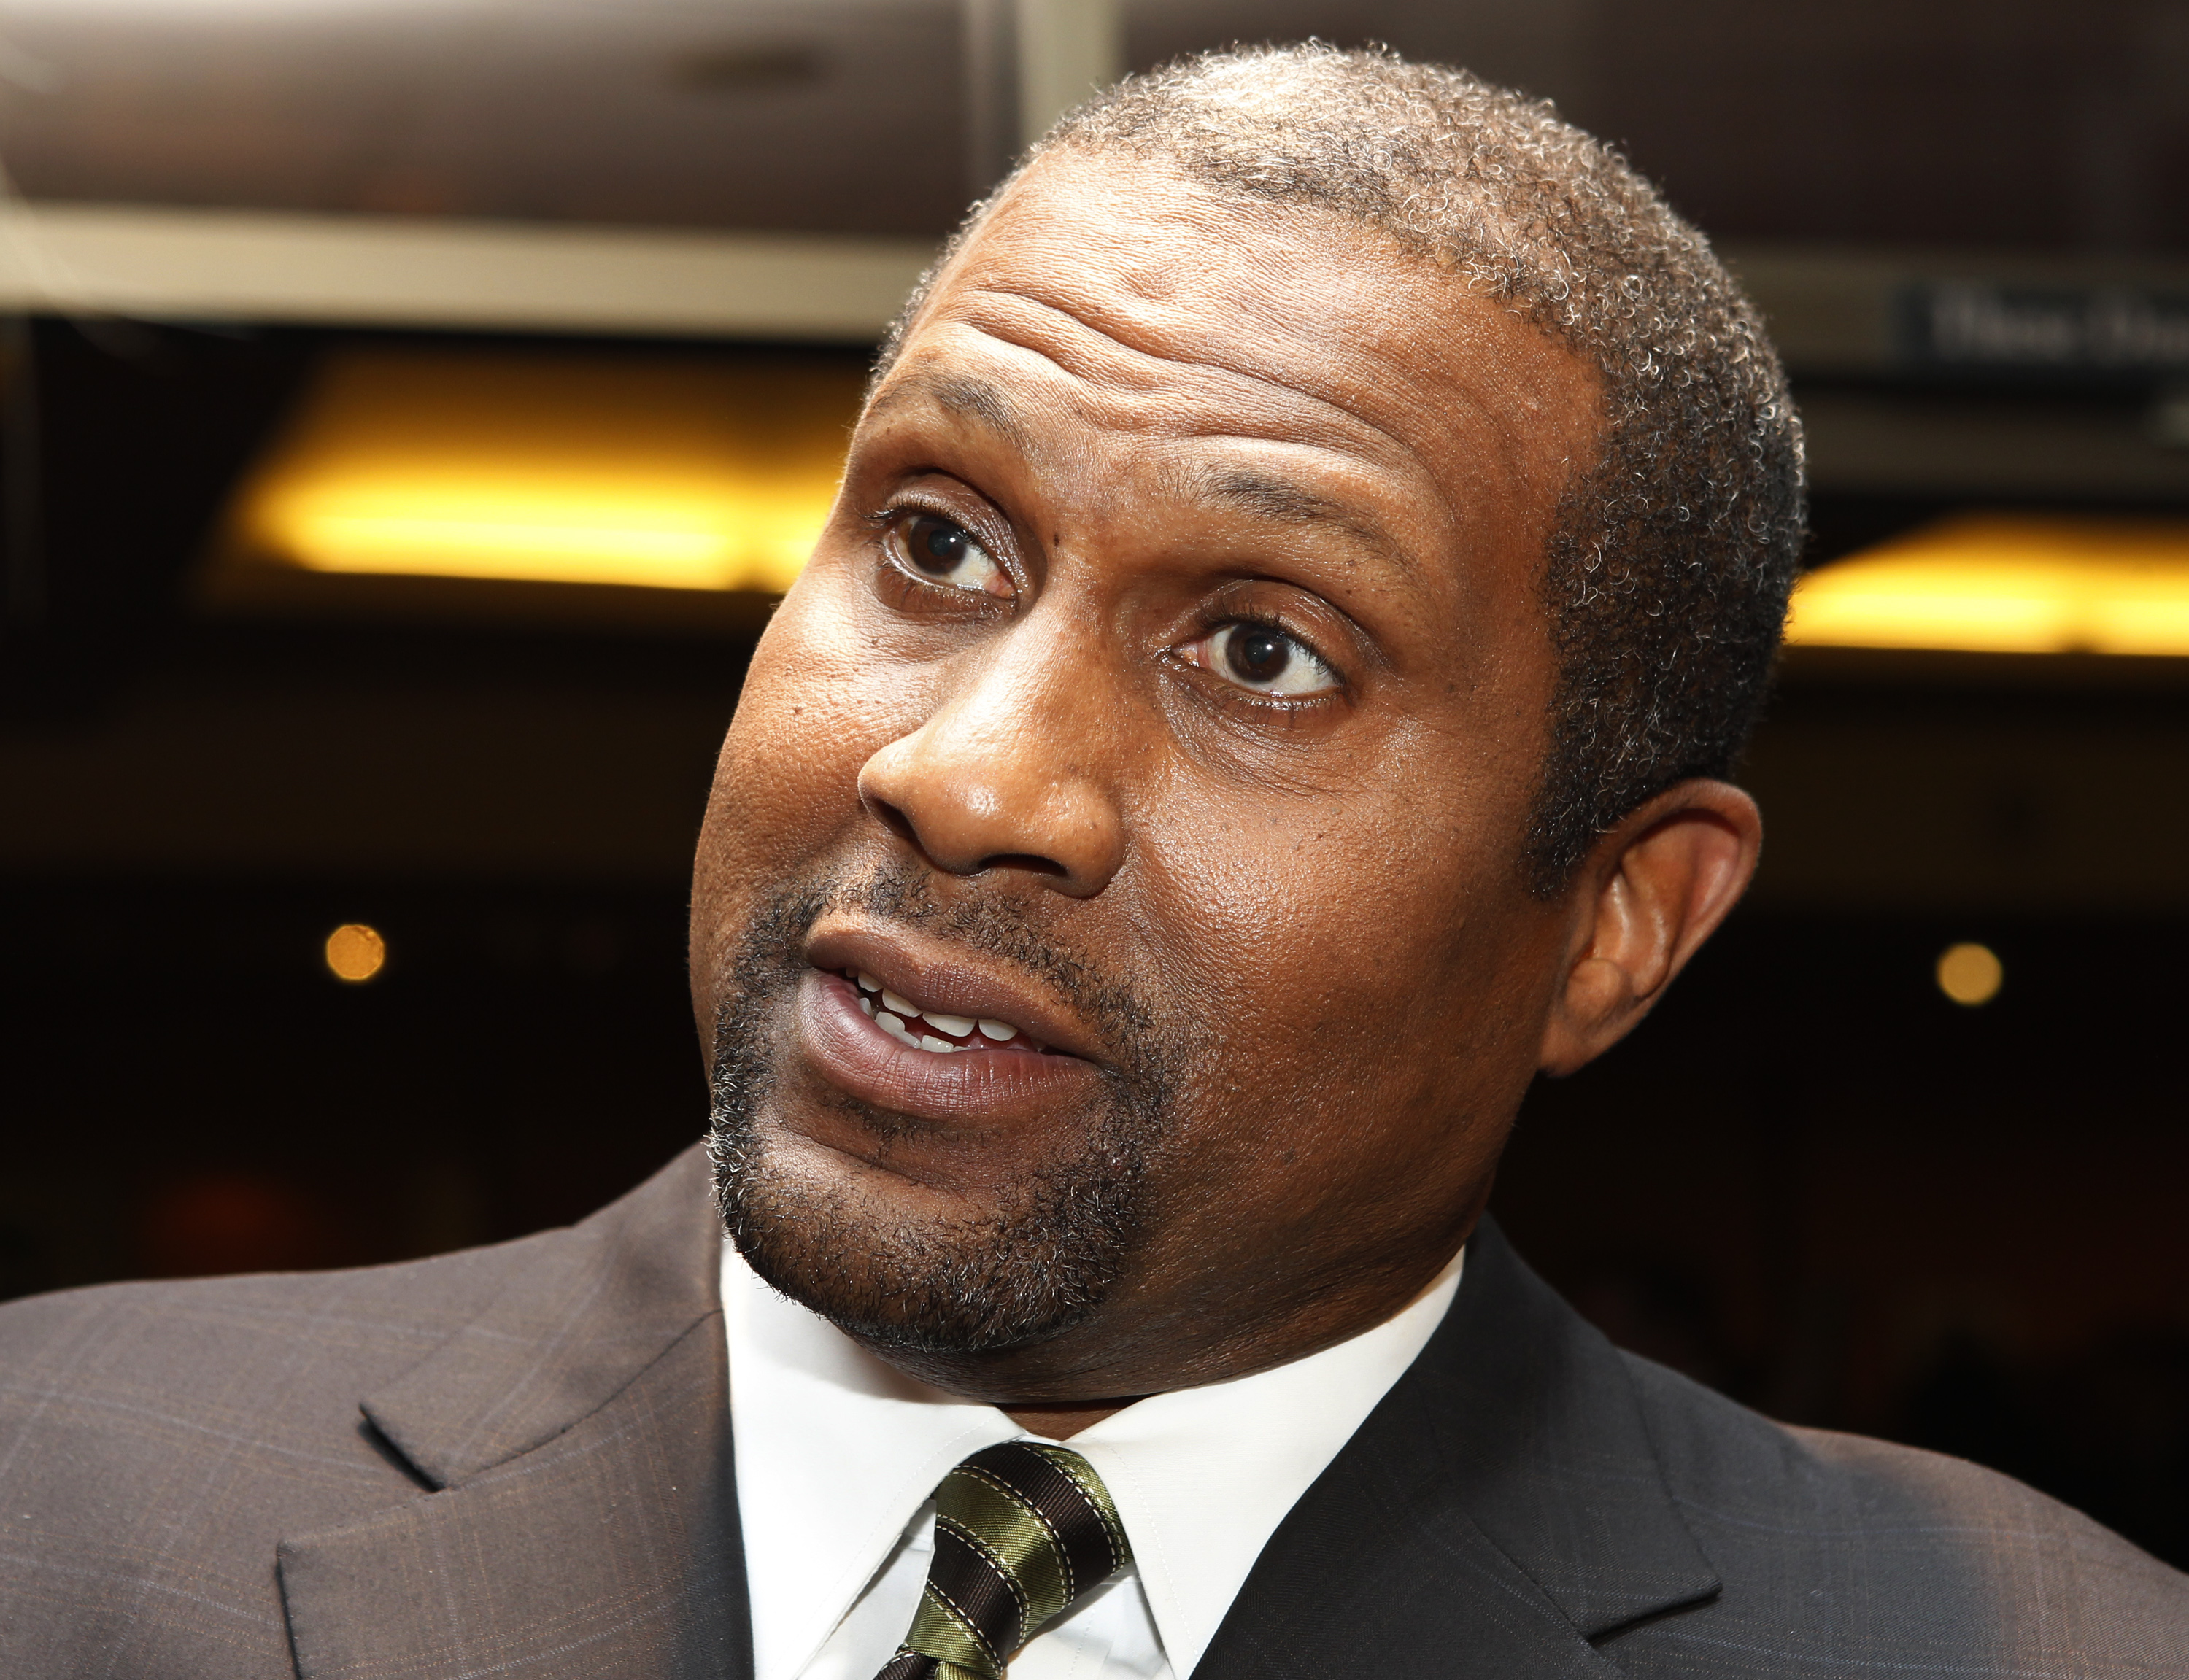 Host Tavis Smiley argues black people have lost ground in every major economic category over the last ten years.